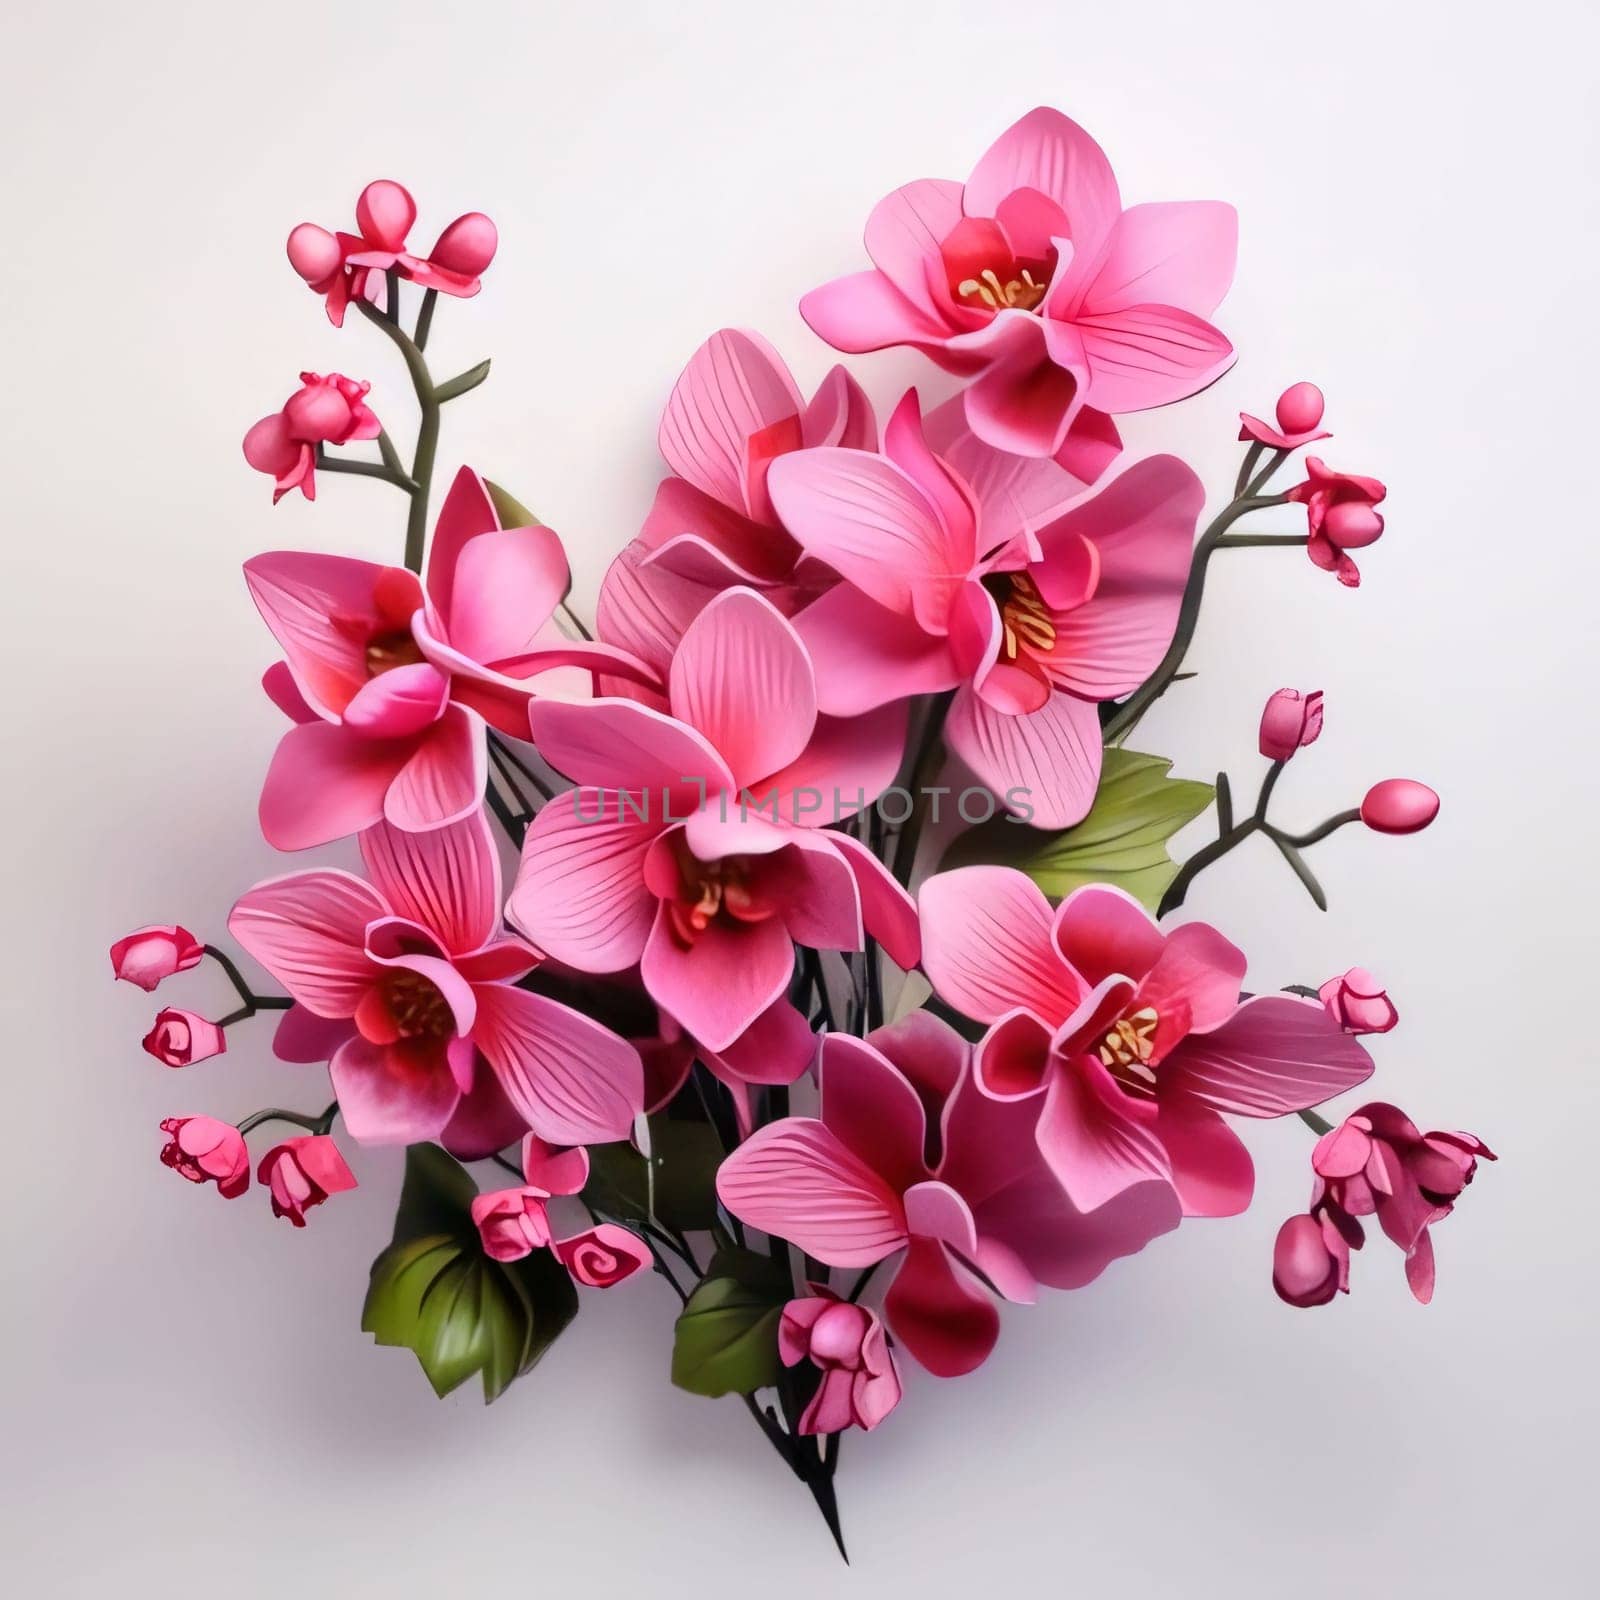 Artificial, beautiful pink flowers with green leaves on a white background. Flowering flowers, a symbol of spring, new life. A joyful time of nature waking up to life.